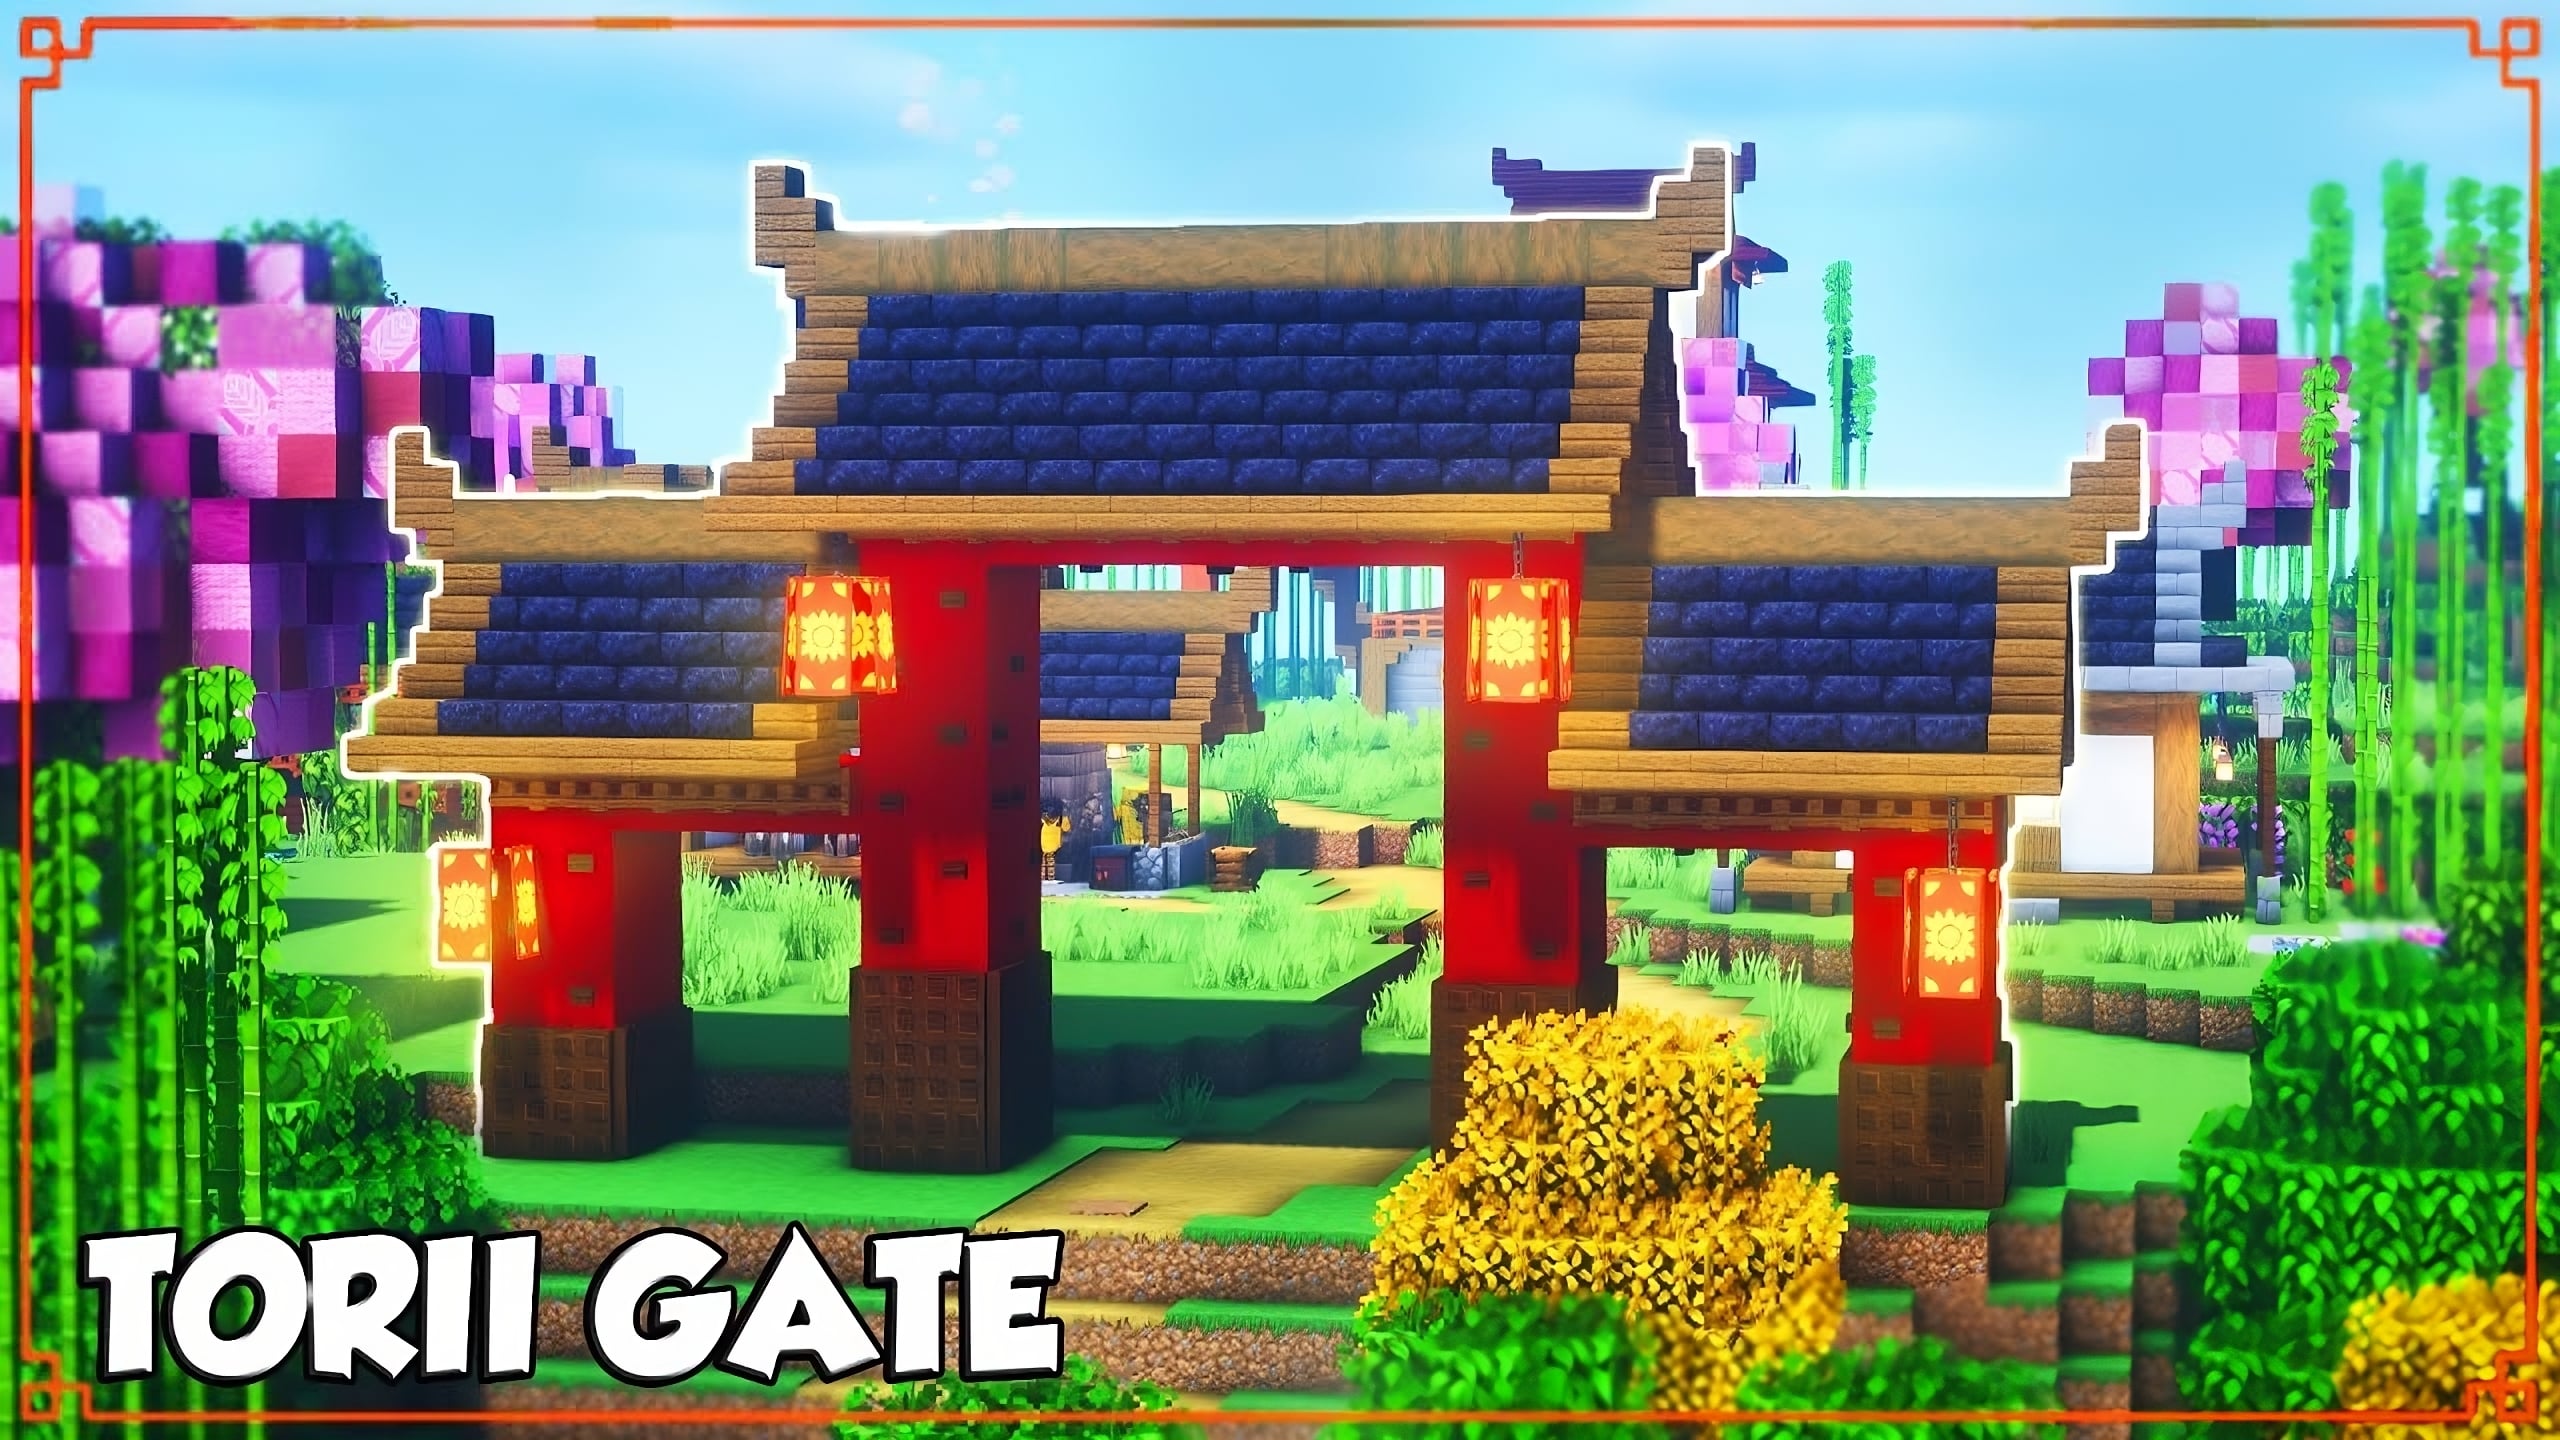 Magnificent Japanese Torii Gate in Minecraft - TBM | TheBestMods